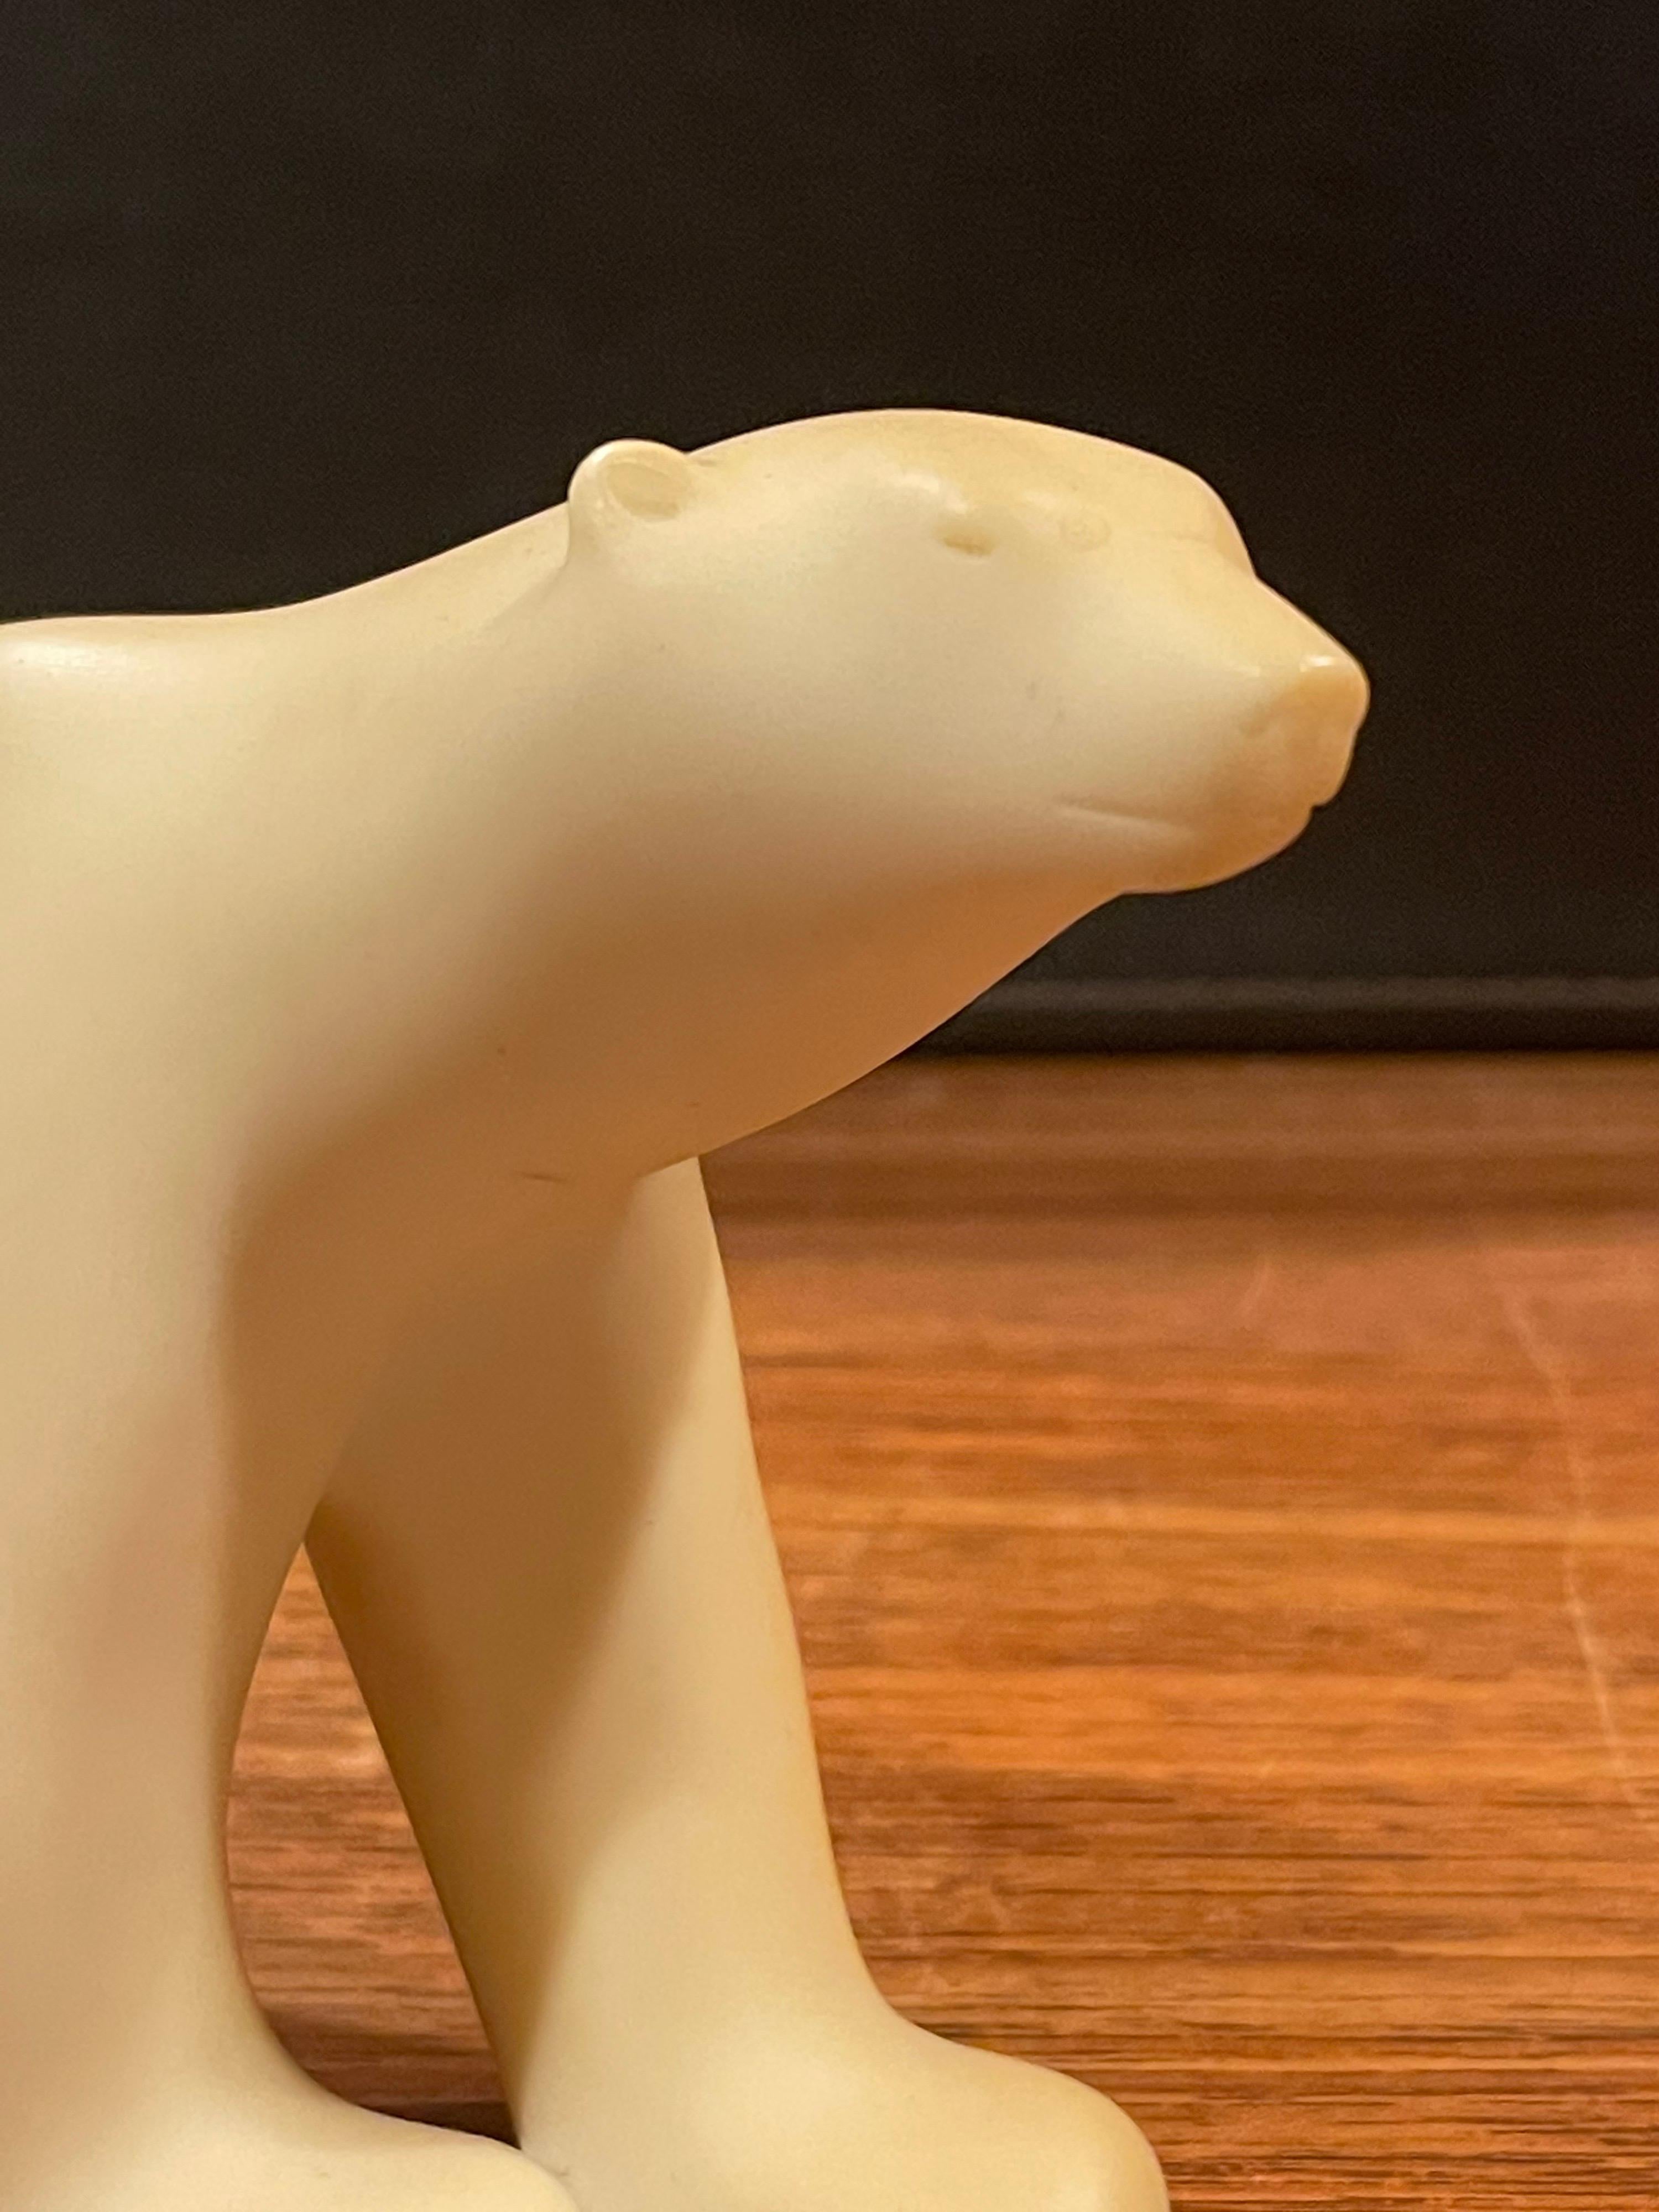 Cast Resin Polar Bear Sculpture by Francois Pompon for the Moma Collection In Good Condition For Sale In San Diego, CA